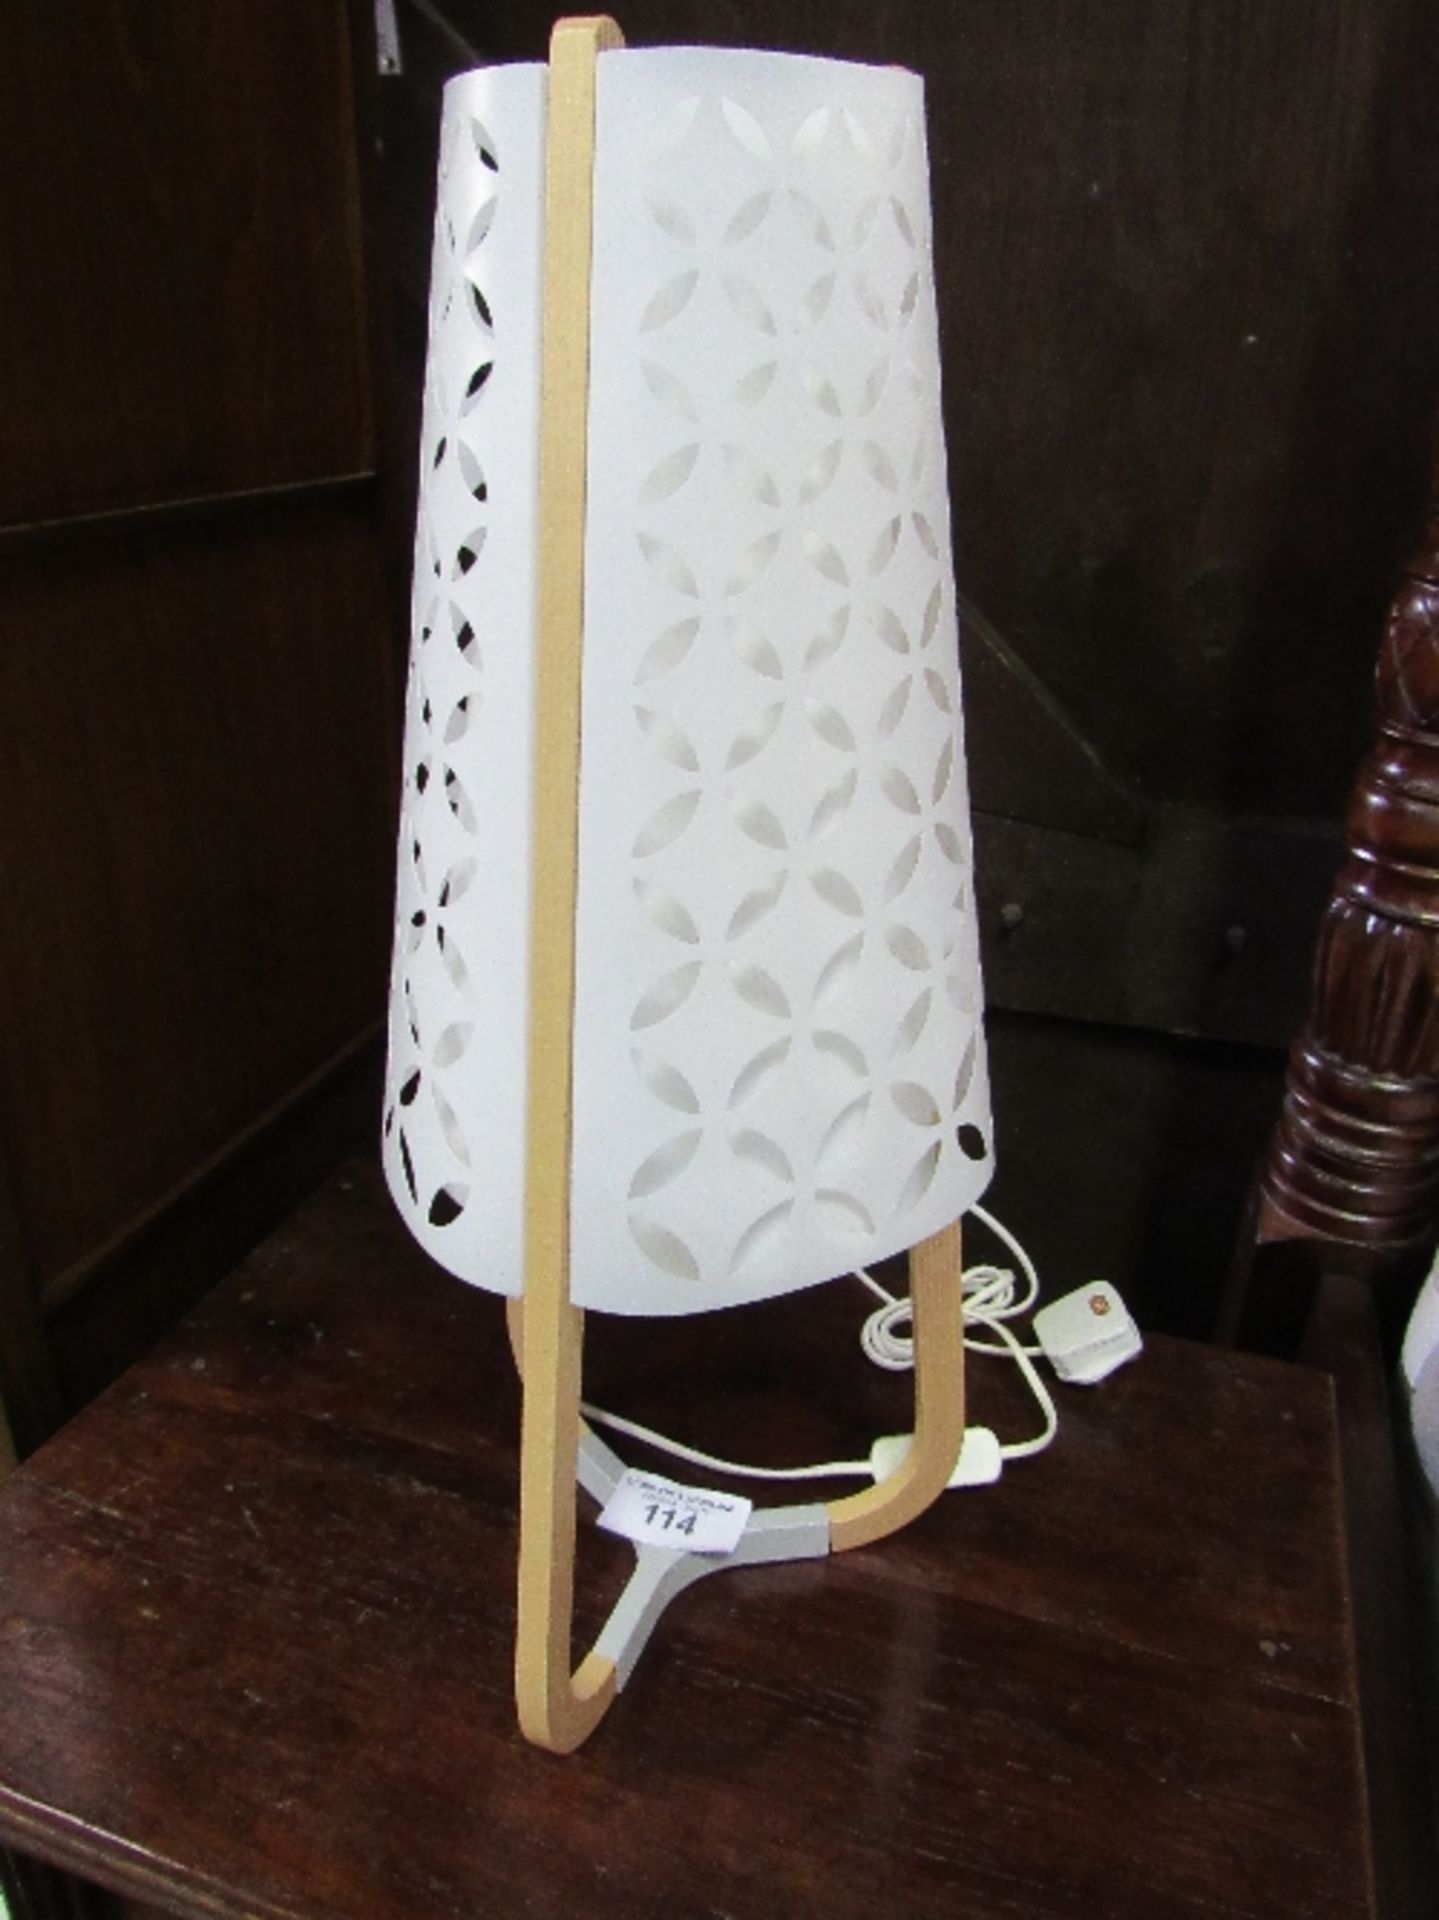 Pair of wood framed & integral plastic shade table lamps, 24" tall - Image 2 of 3